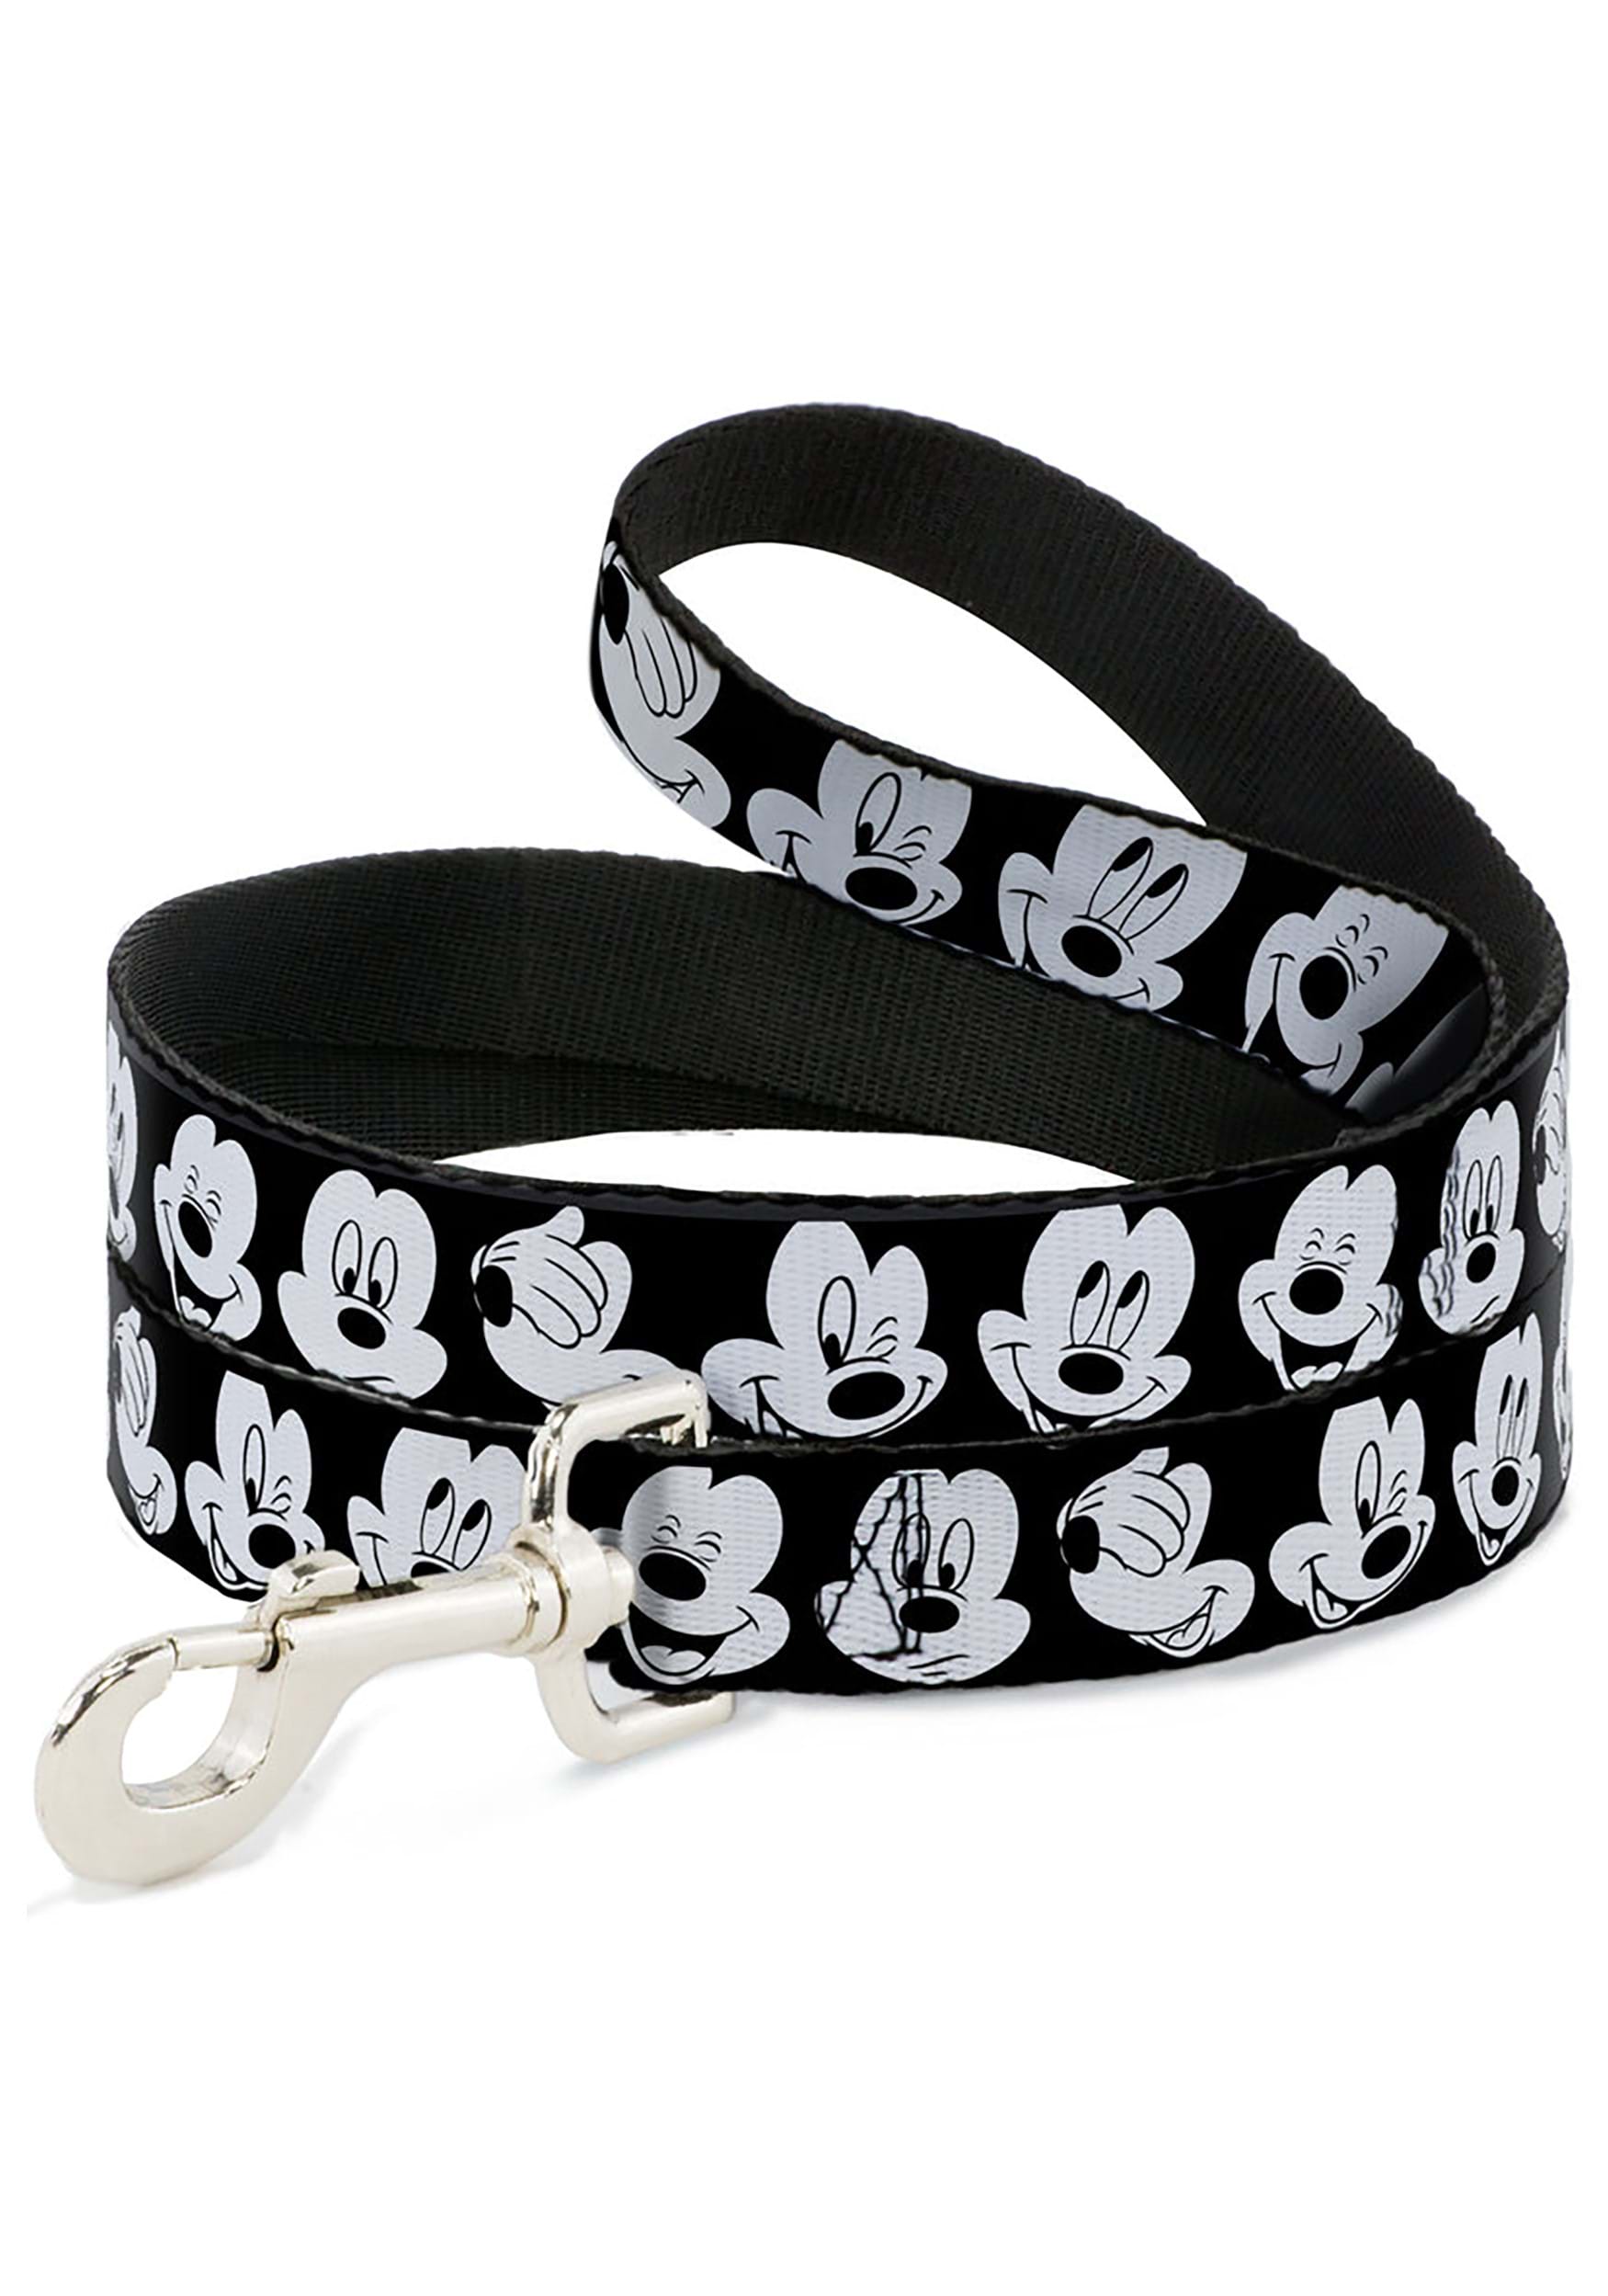 Mickey Mouse Expressions Pet Leash